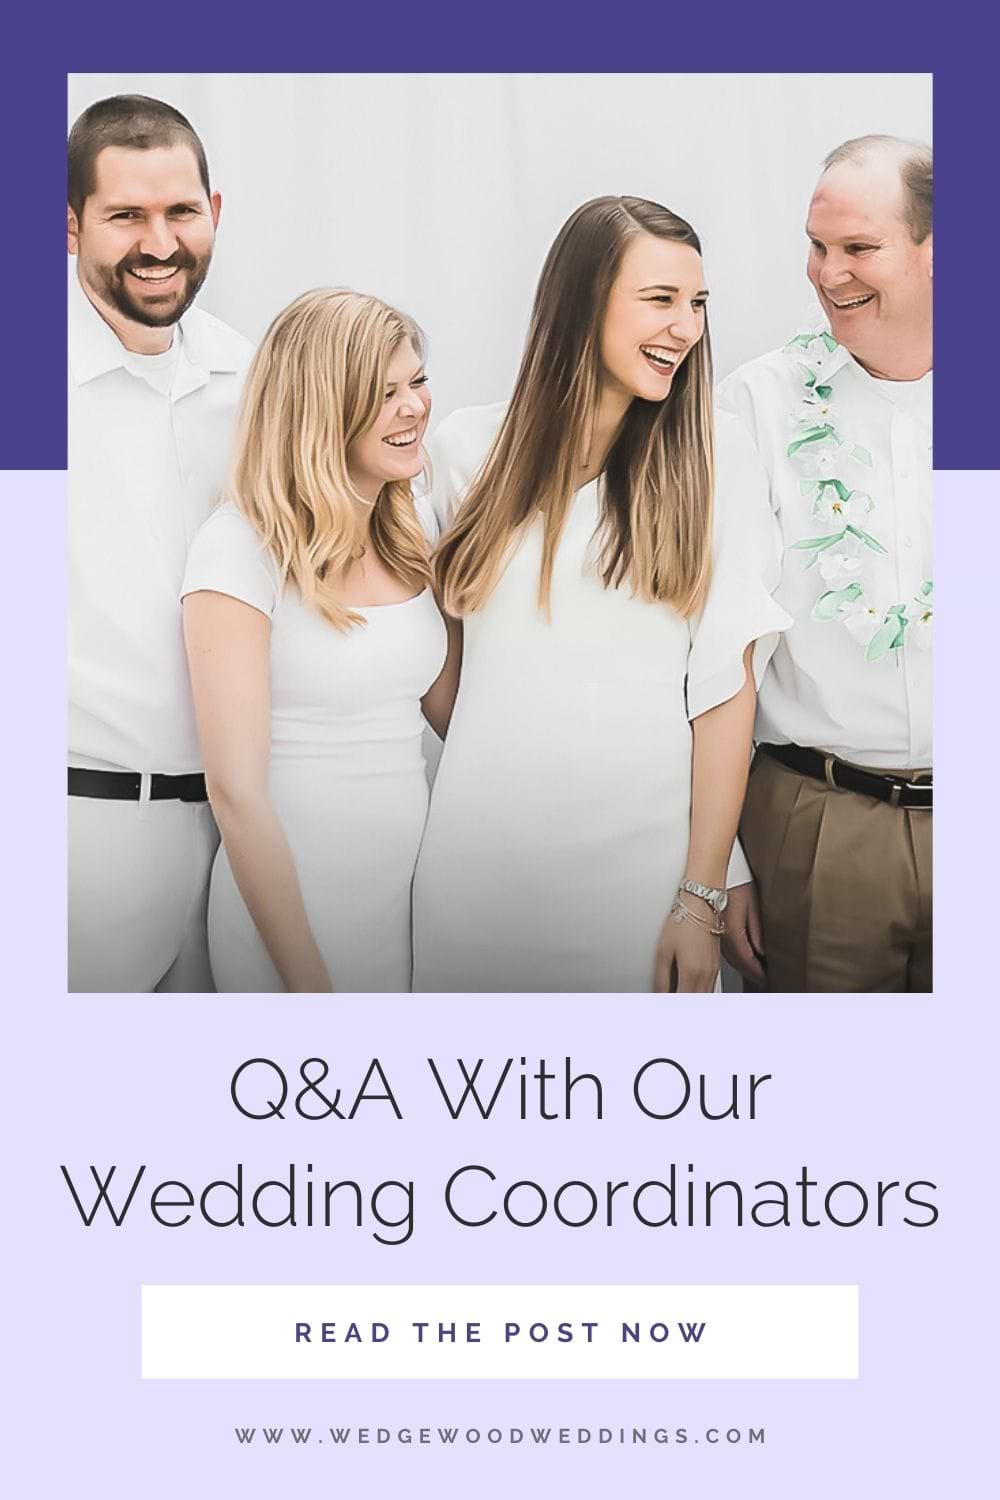 “My love for planning and organizing in my own life led me to seek out a career that allows me to let my passion shine through at work. I truly love going into work each day, and helping others celebrate their best day ever!” – Emma, Tapestry House by Wedgewood Weddings. Read a Q&A with our team of wedding coordinators, and find out what they love best about their role... and why they wouldn't change it for the world!